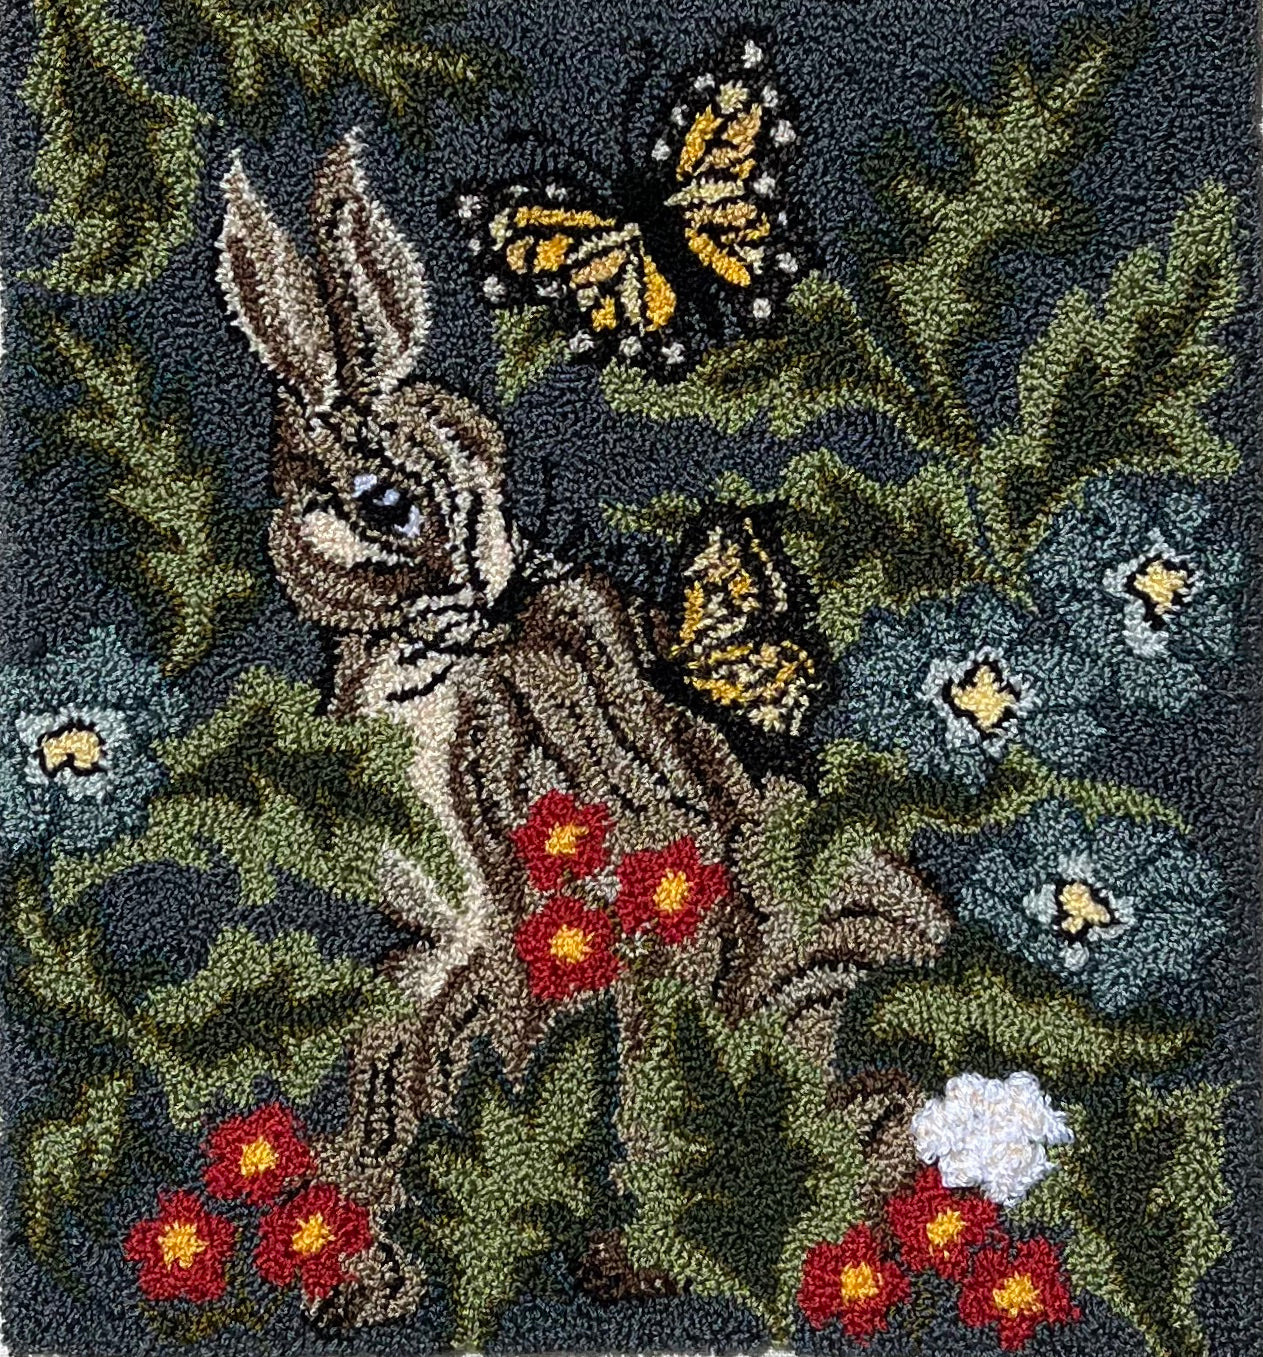 Hare with Friends PDF Digital Download Punch Needle Pattern by Orphaned Wool. This design is for anyone that loves bunnies and butterflies. This bunny is nestled in with flowers and foliage. makes a stunning finished design. DMC Floss was used in pattern.